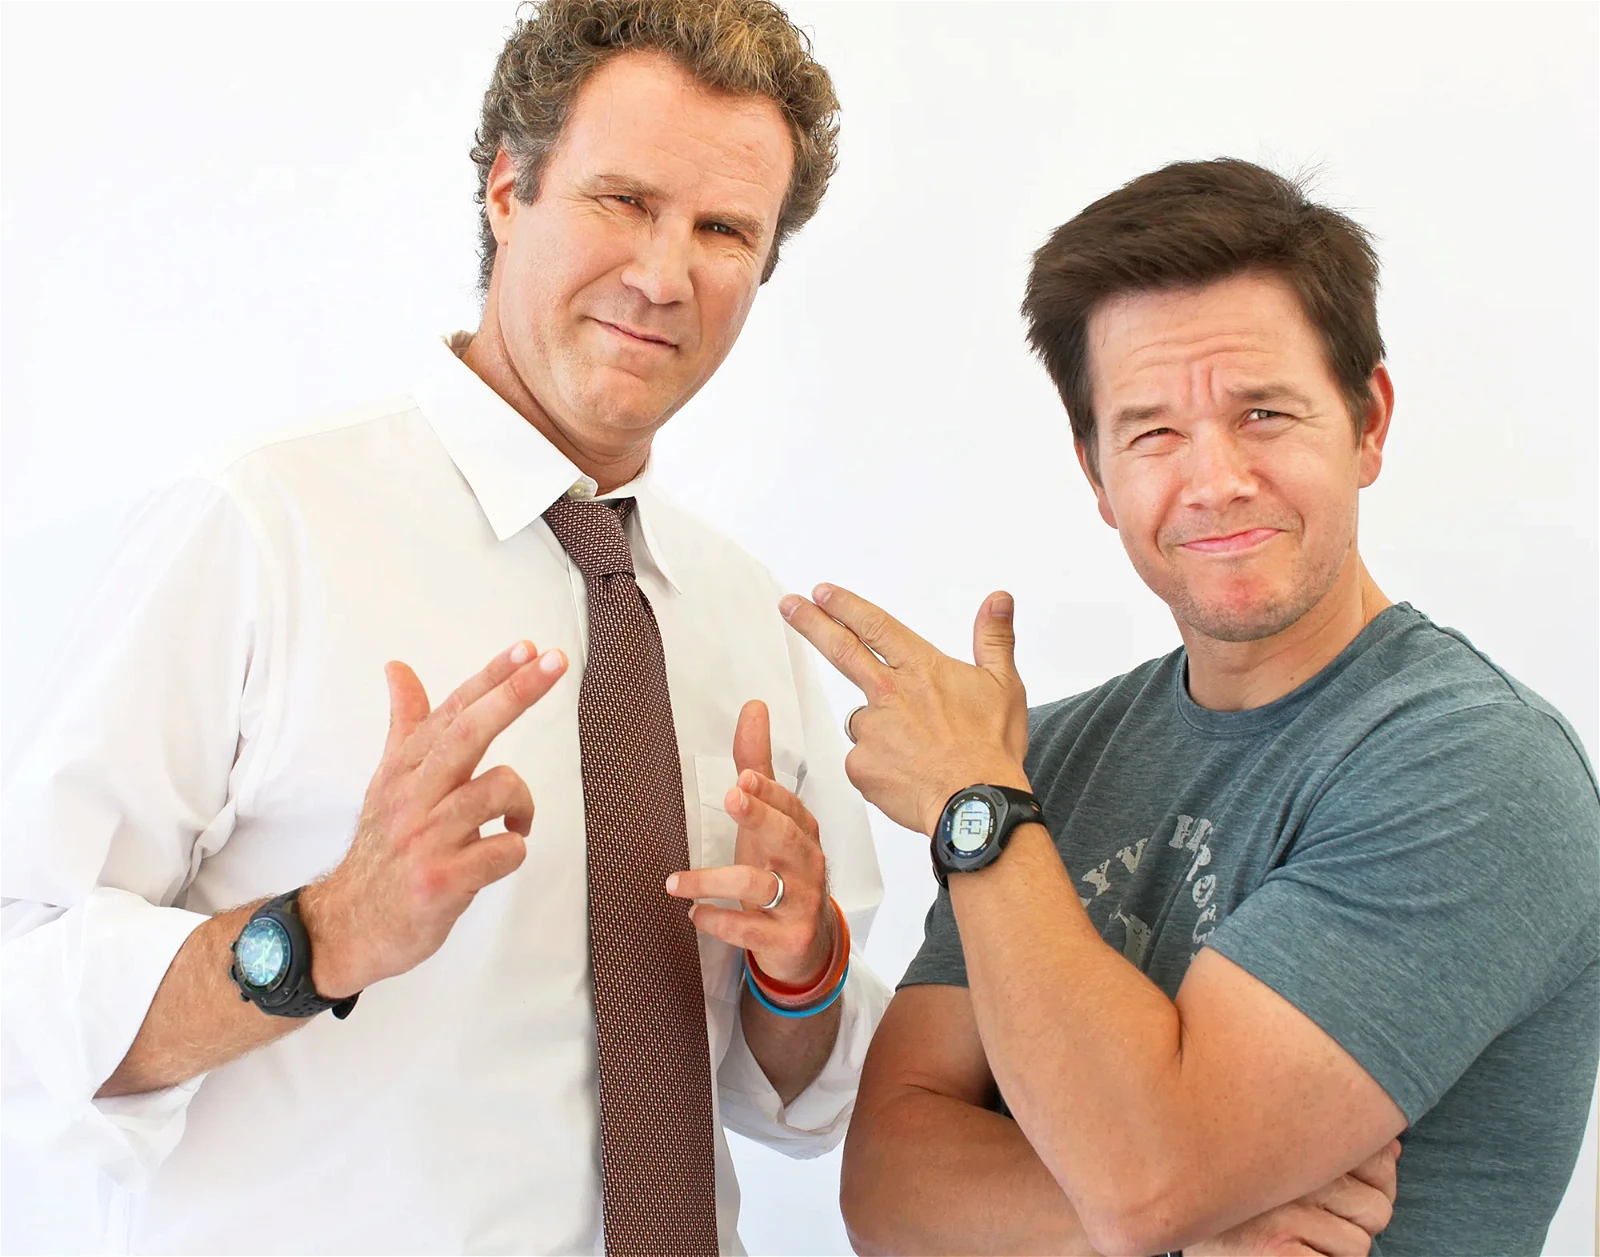 Mark Wahlberg and Will Ferrell starred together in The Other Guys